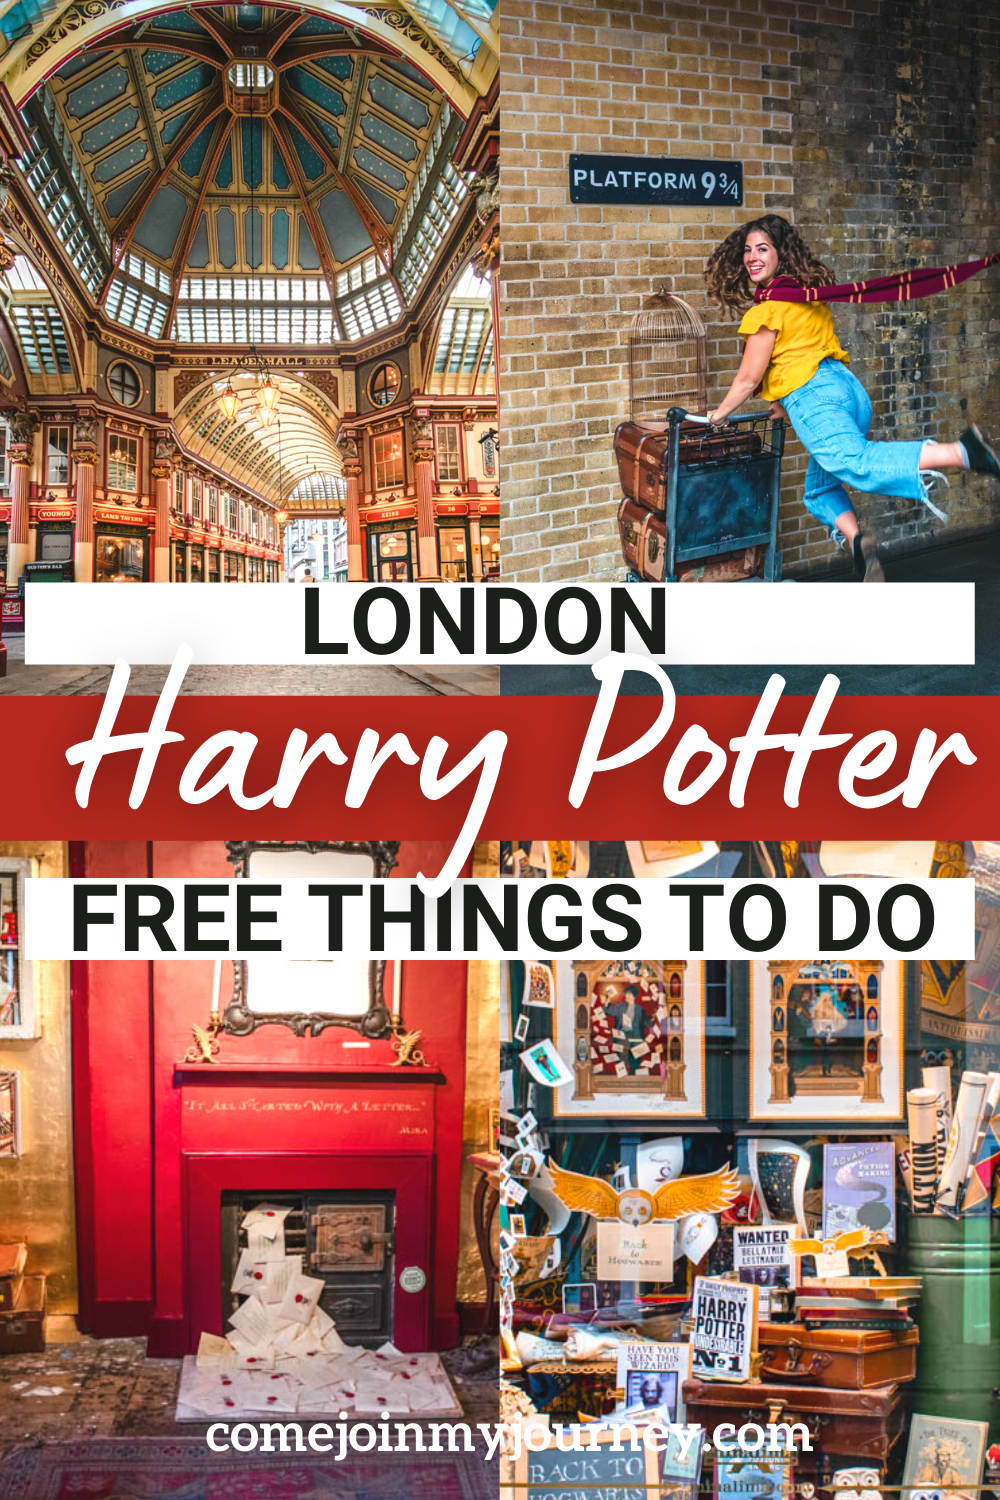 Free Harry Potter Things to do in London